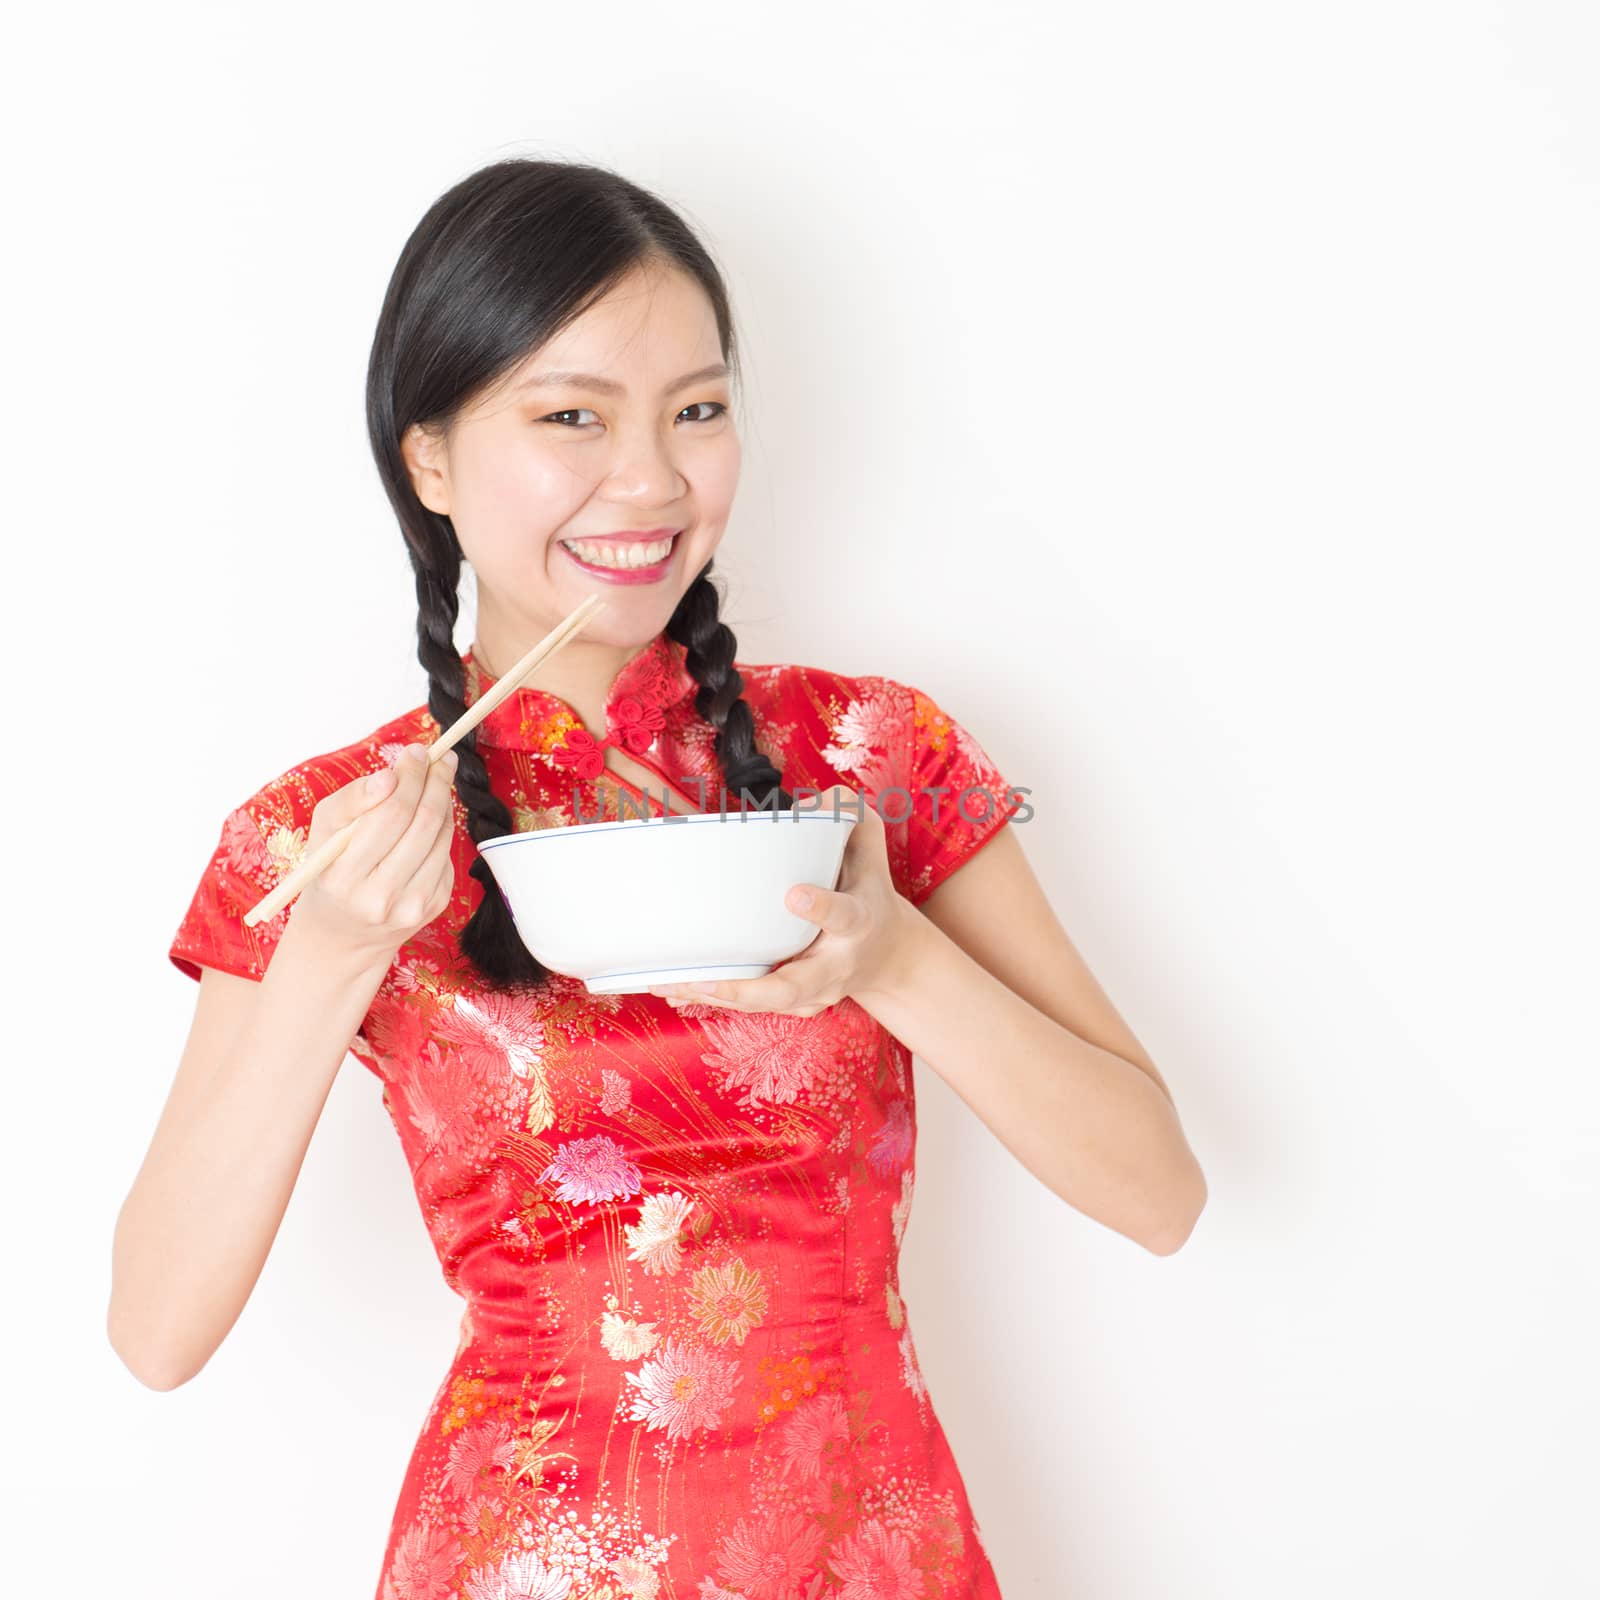 Oriental woman in red cheongsam eating with chopsticks by szefei